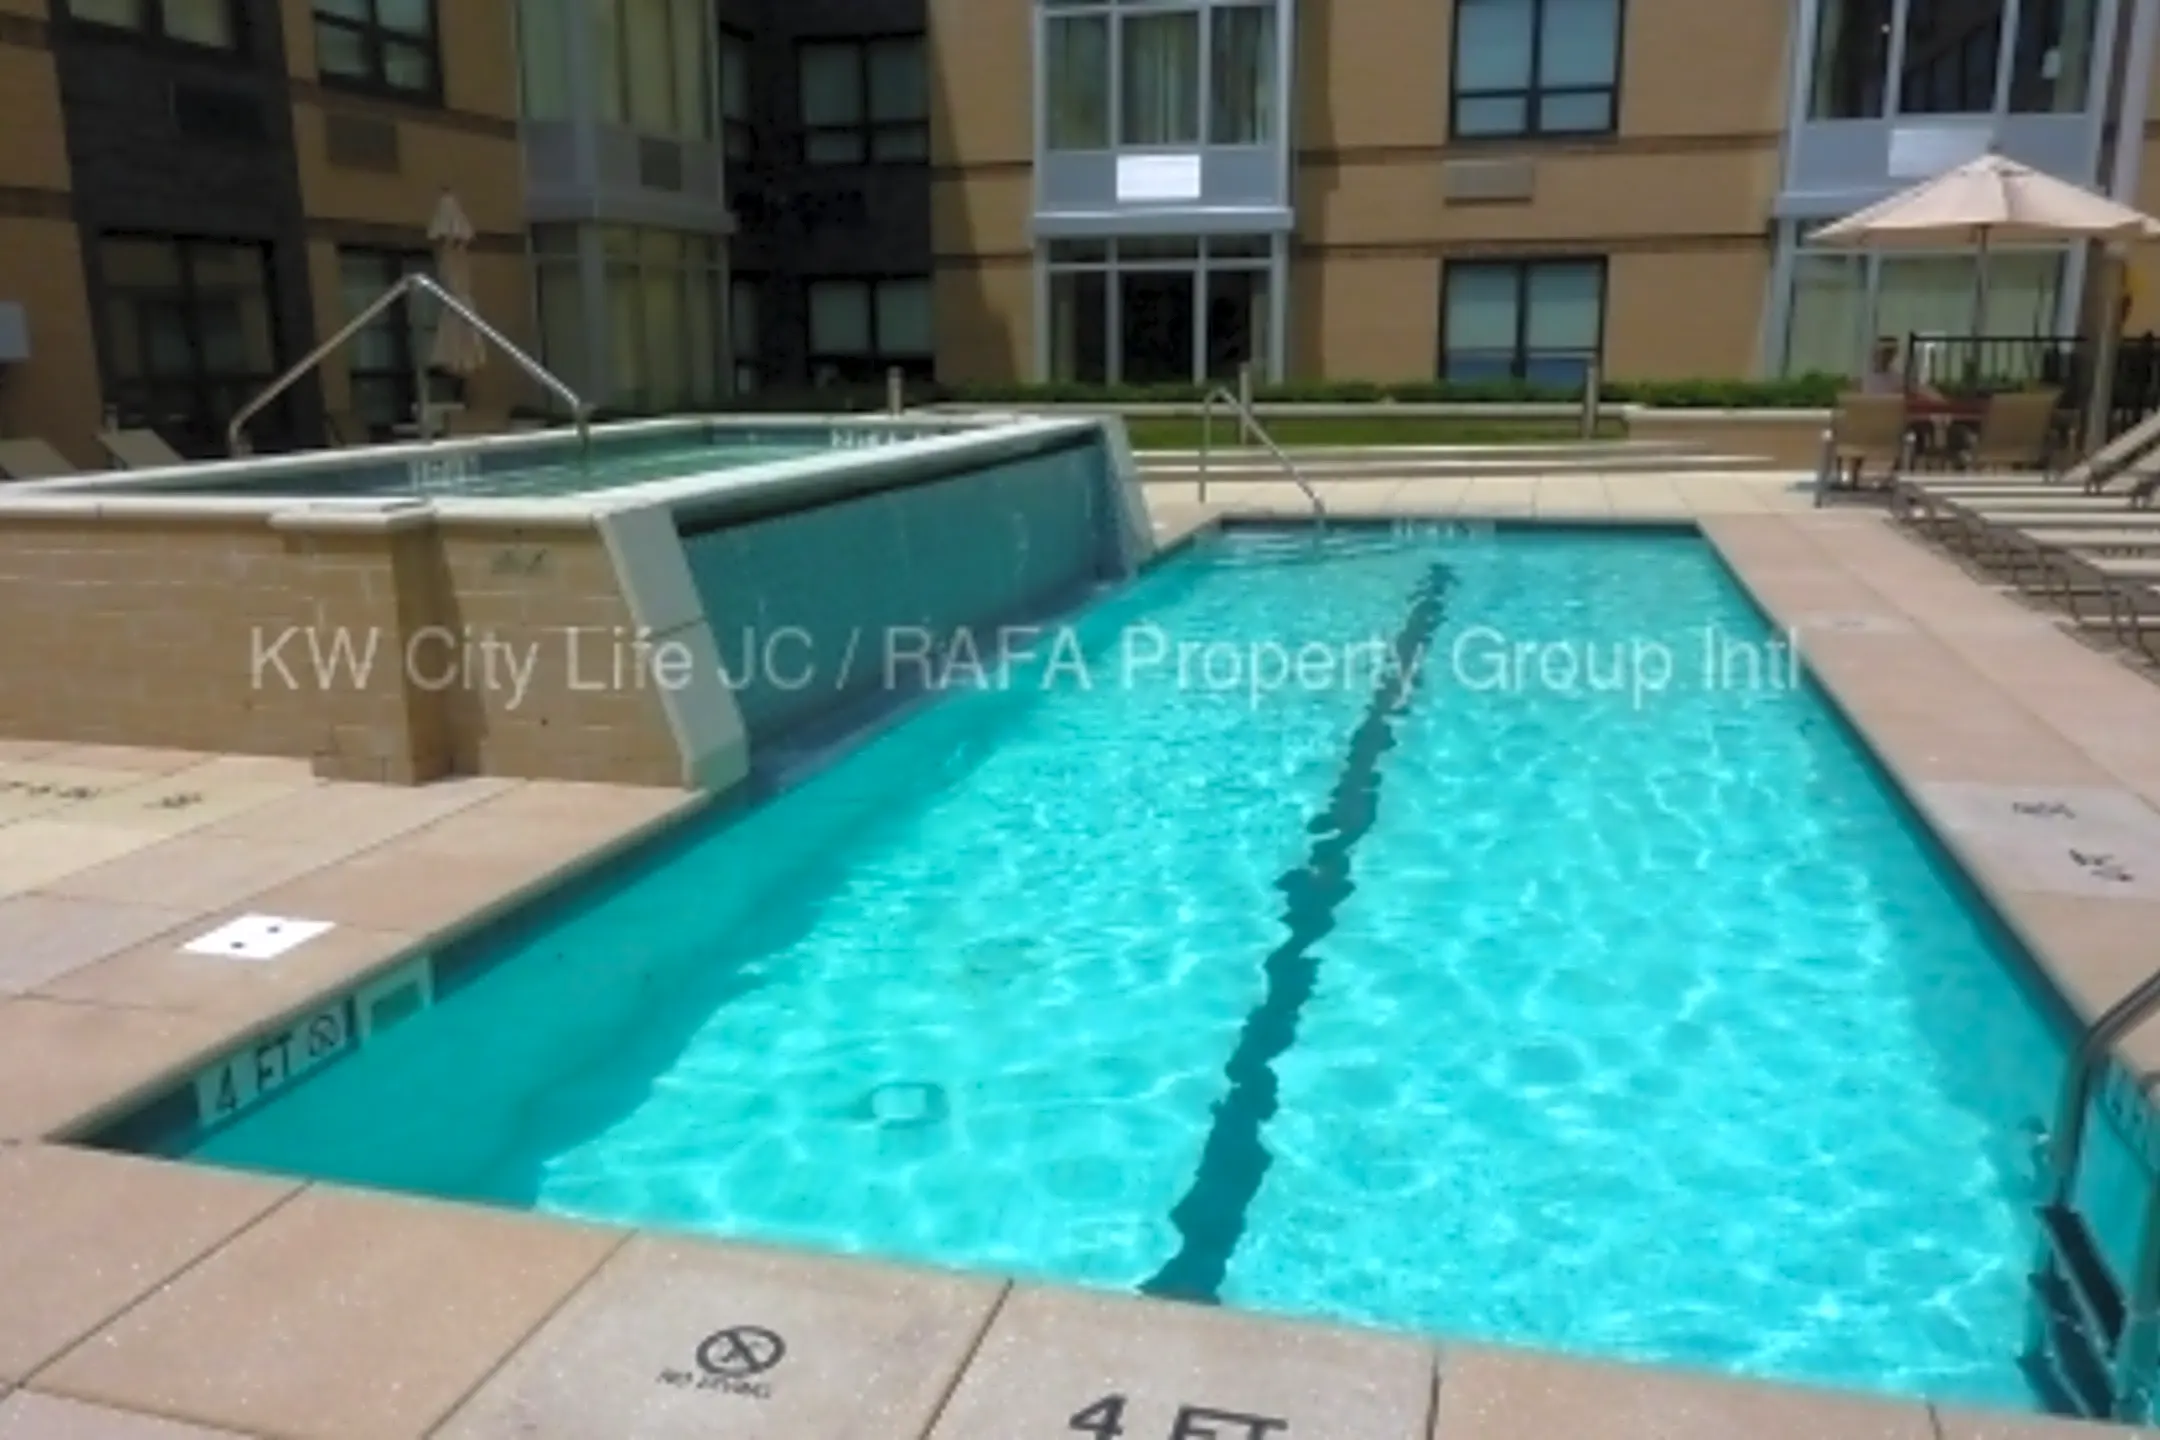 Pool - 1500 Ave at Port Imperial - Weehawken, NJ